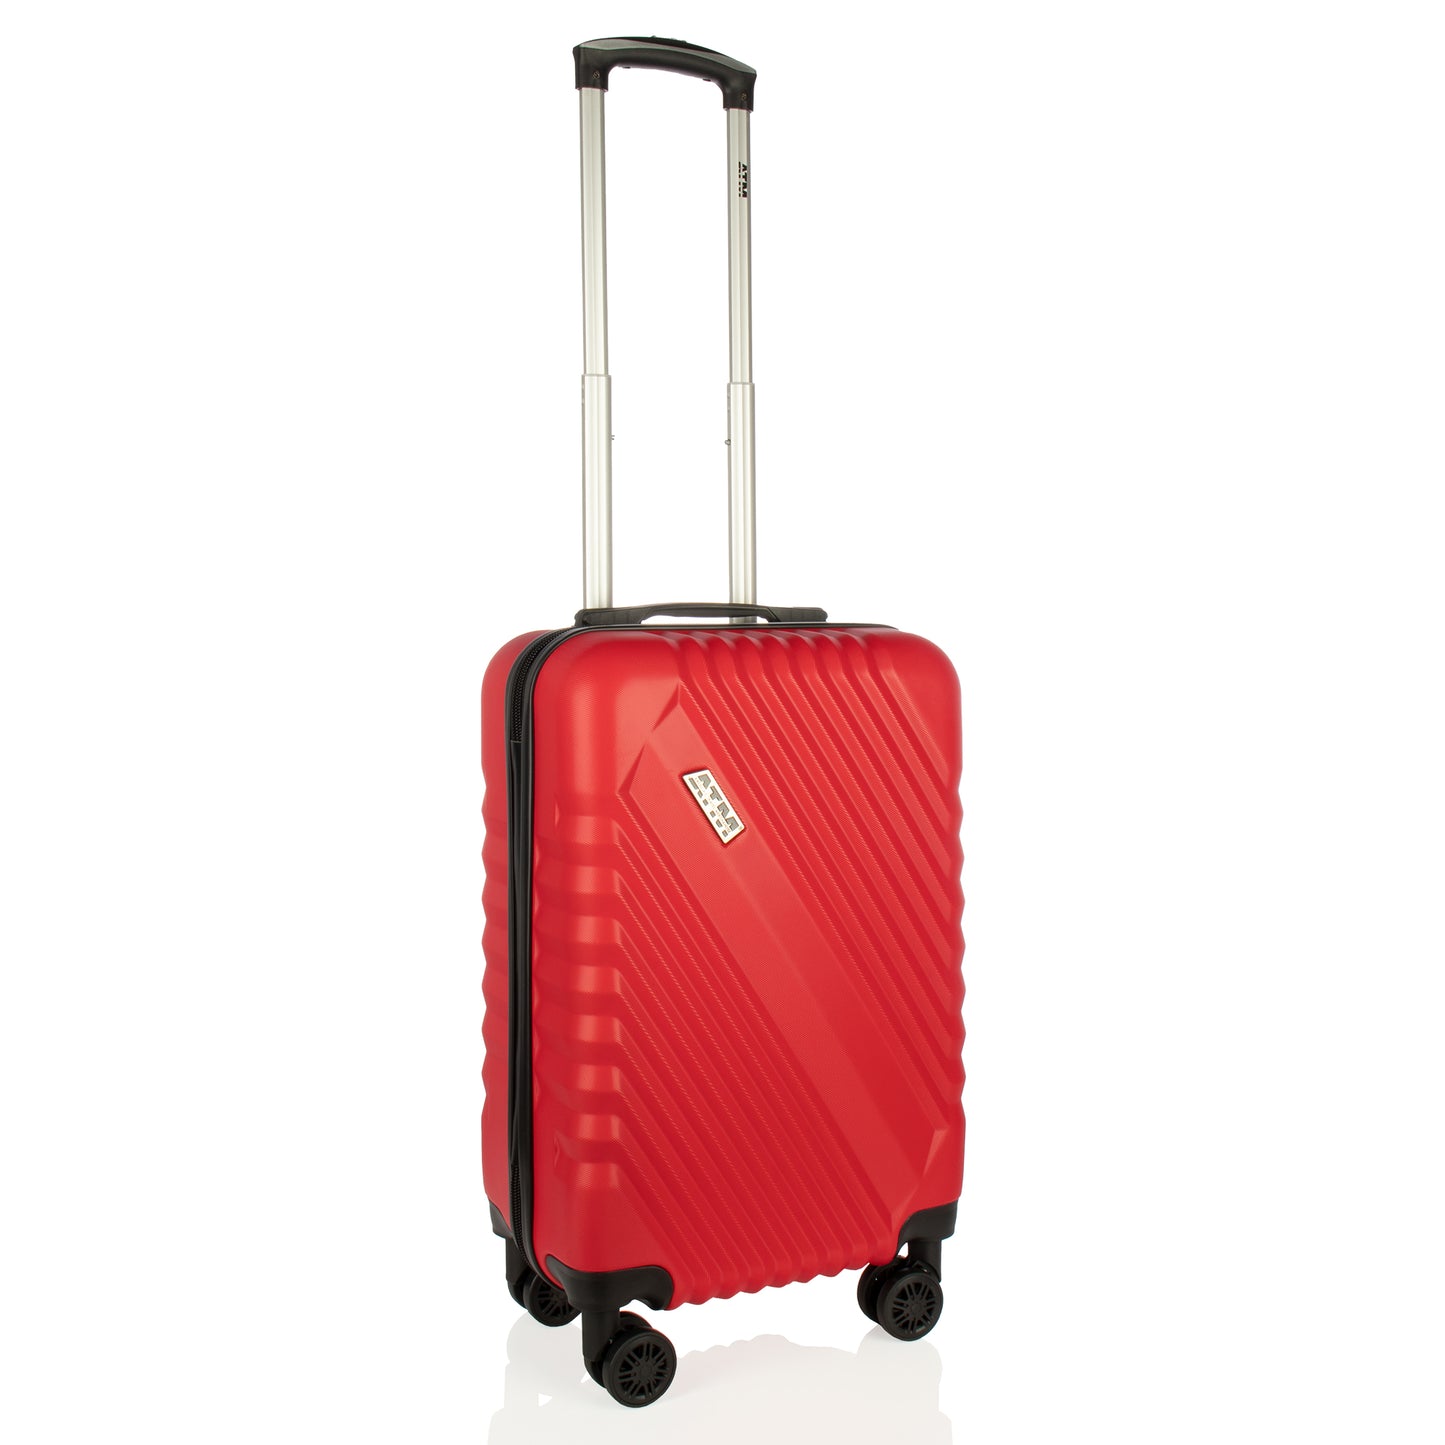 ATM Luggage 3 Piece Set (20/24/28") Suitcase Lock Spinner Hardshell Core Collection Red